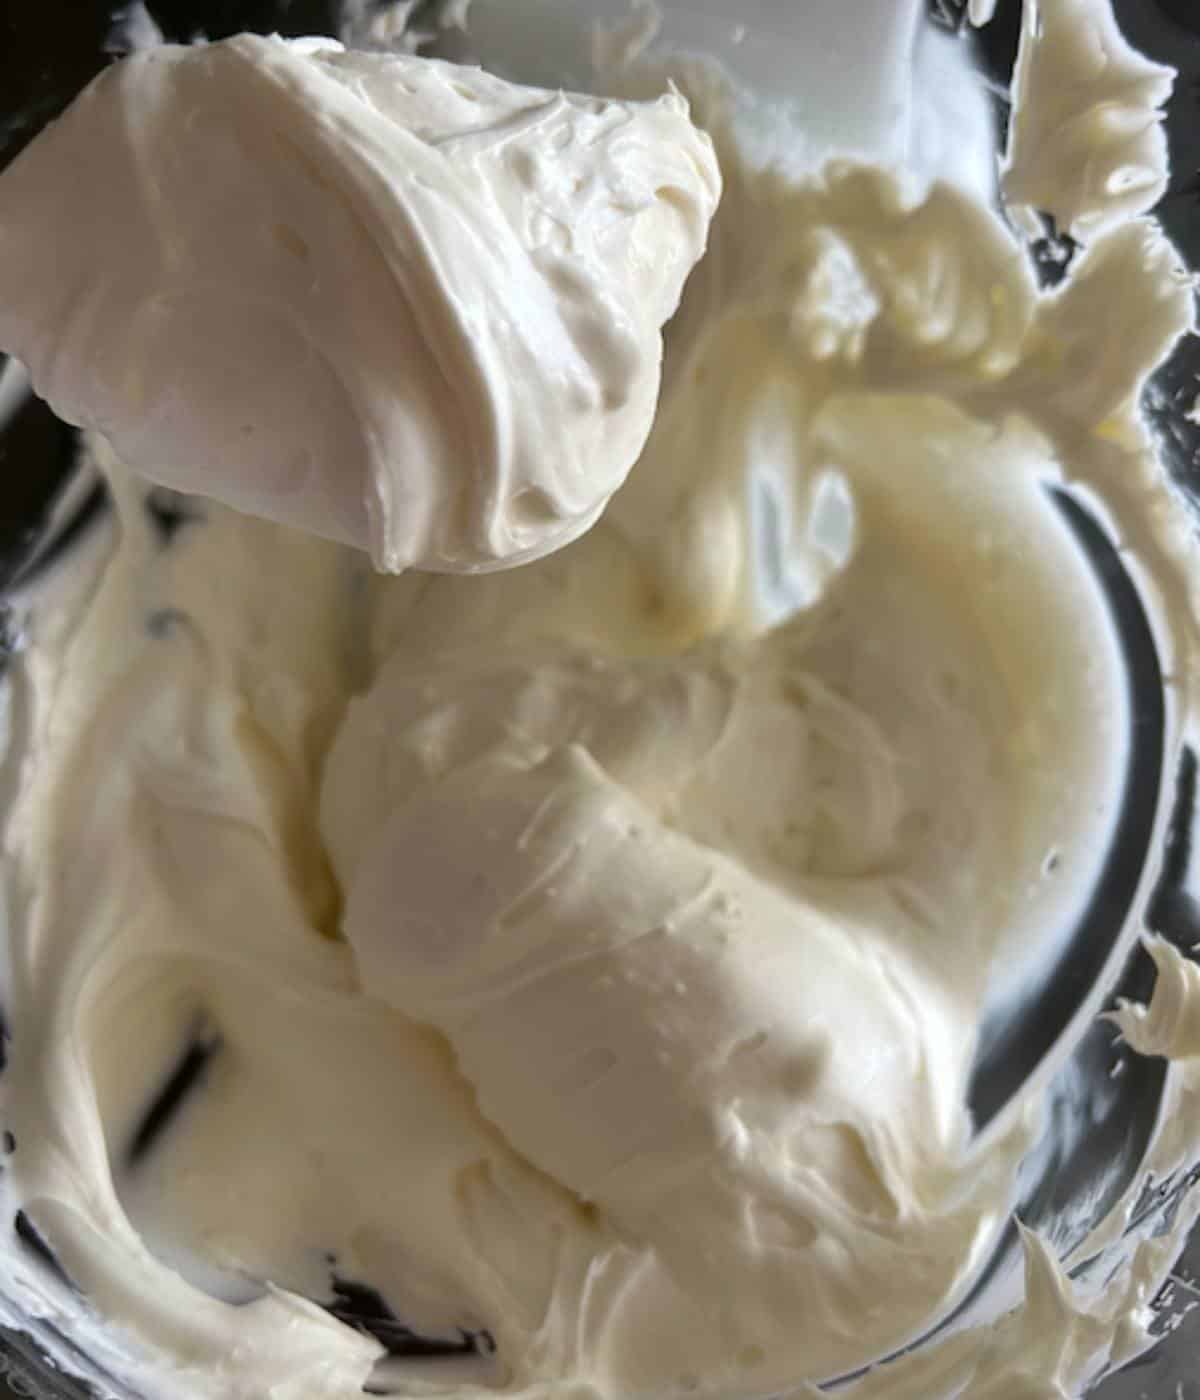 Heavy cream added to filling.